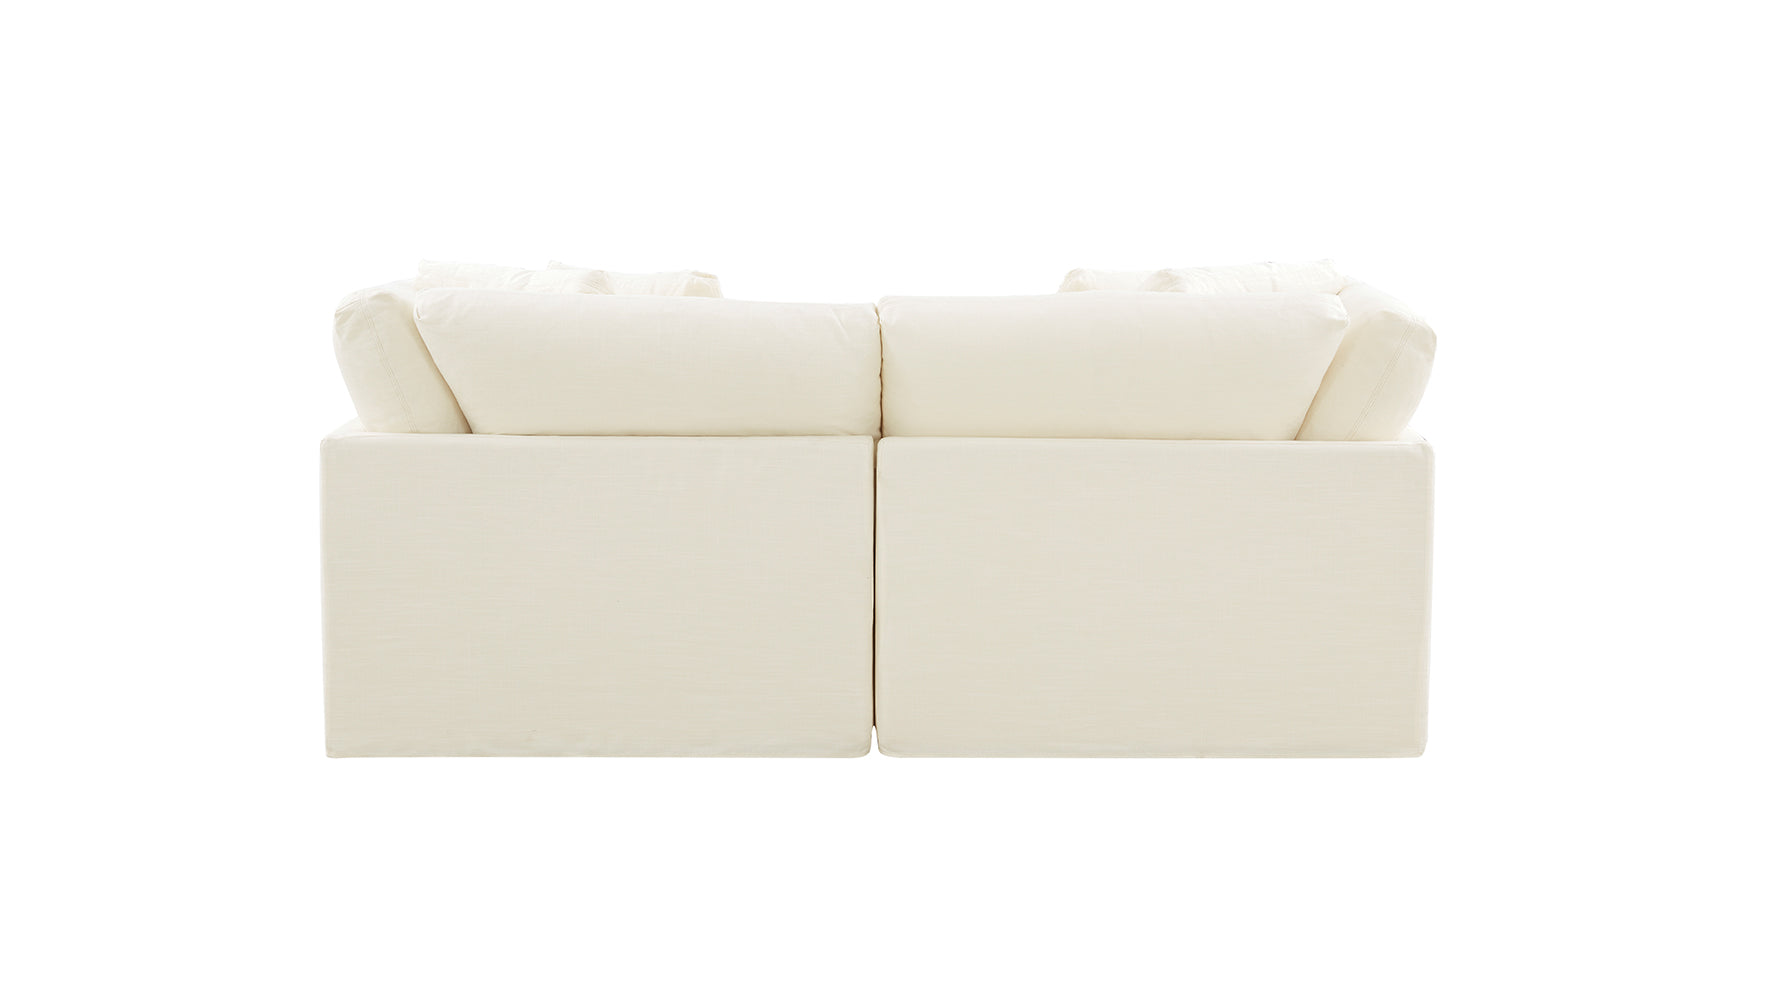 Get Together™ 3-Piece Modular Sectional, Large, Cream Linen - Image 8